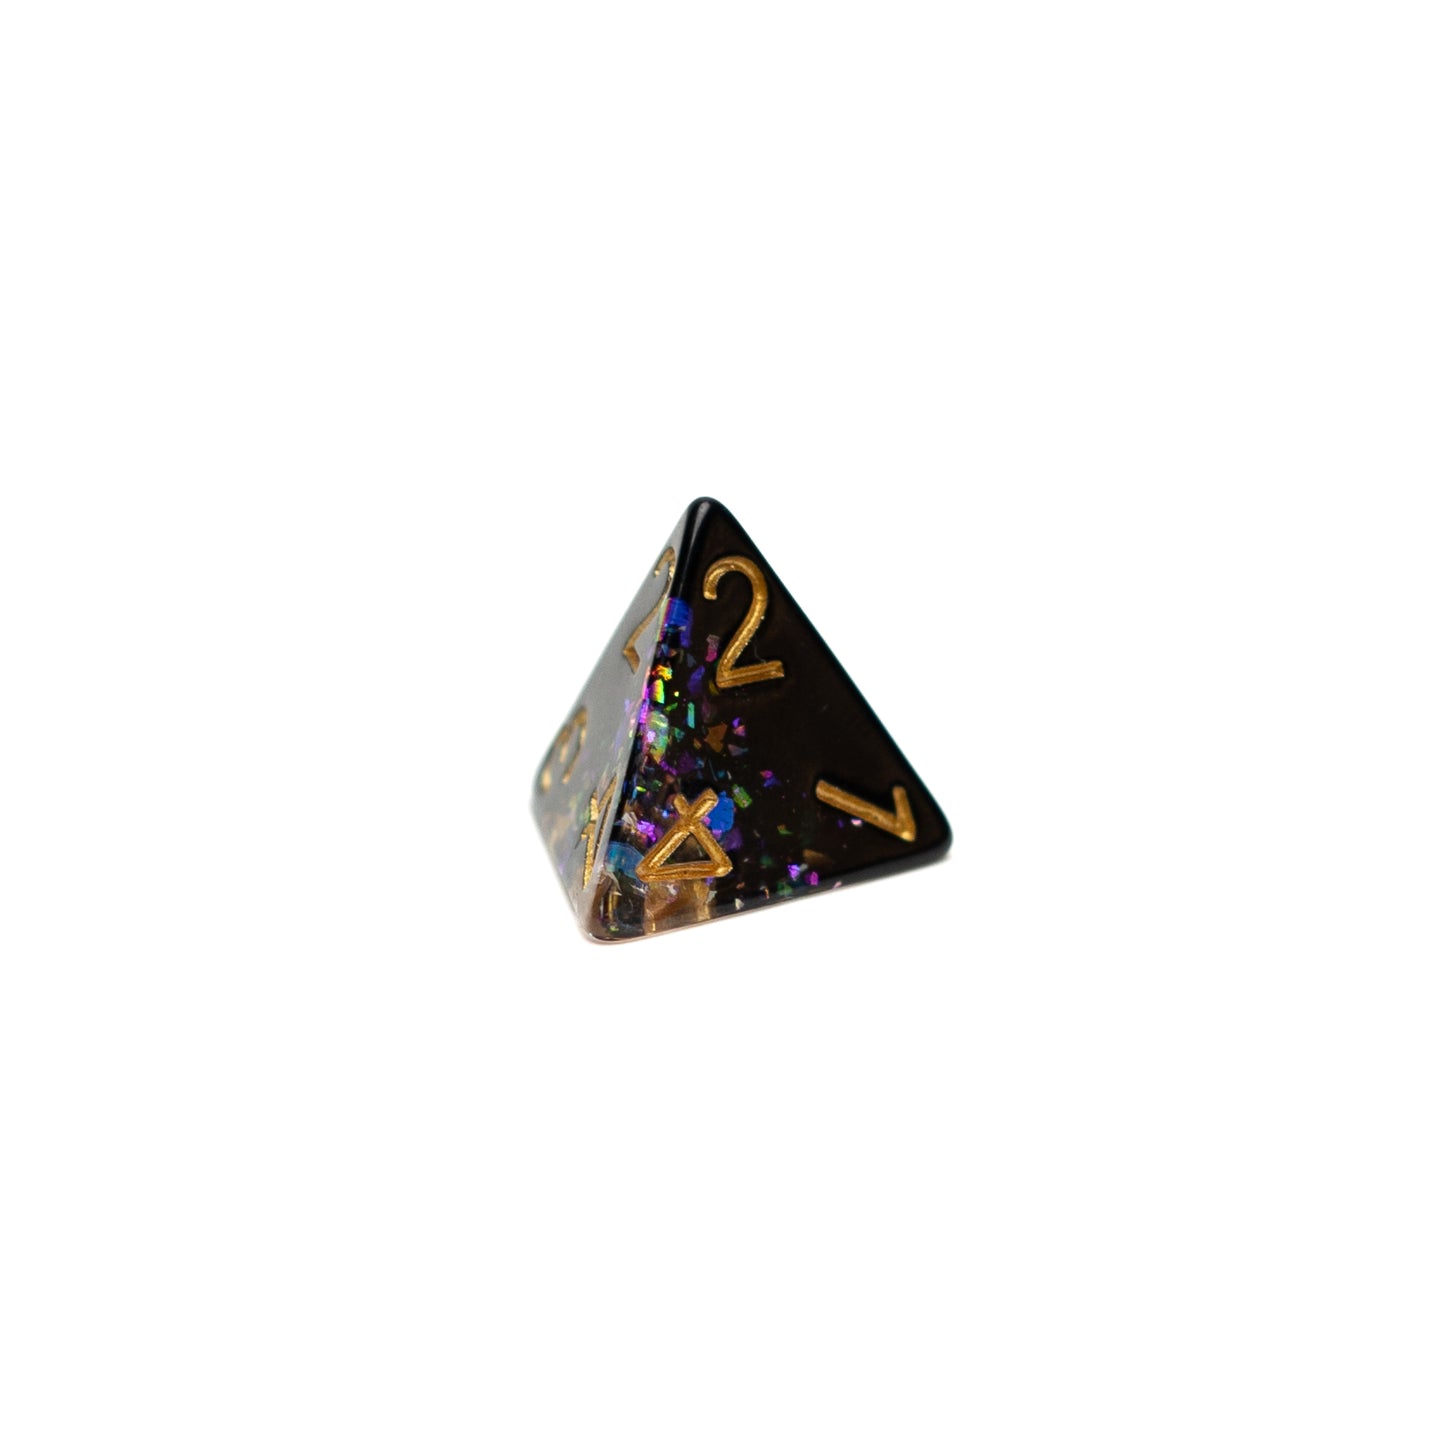 Roll Britannia Derek Normalbeard Dungeons and Dragons D4 Dice with Rainbow Glitter Confetti Aesthetic